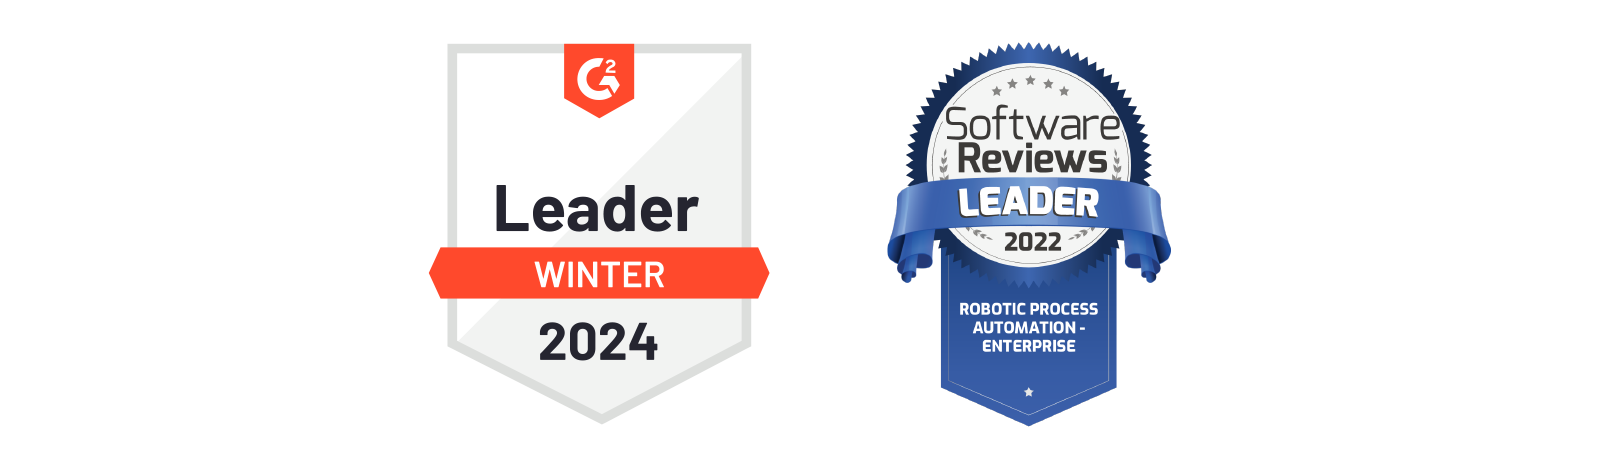 automate-g2-leader-software-review-leader